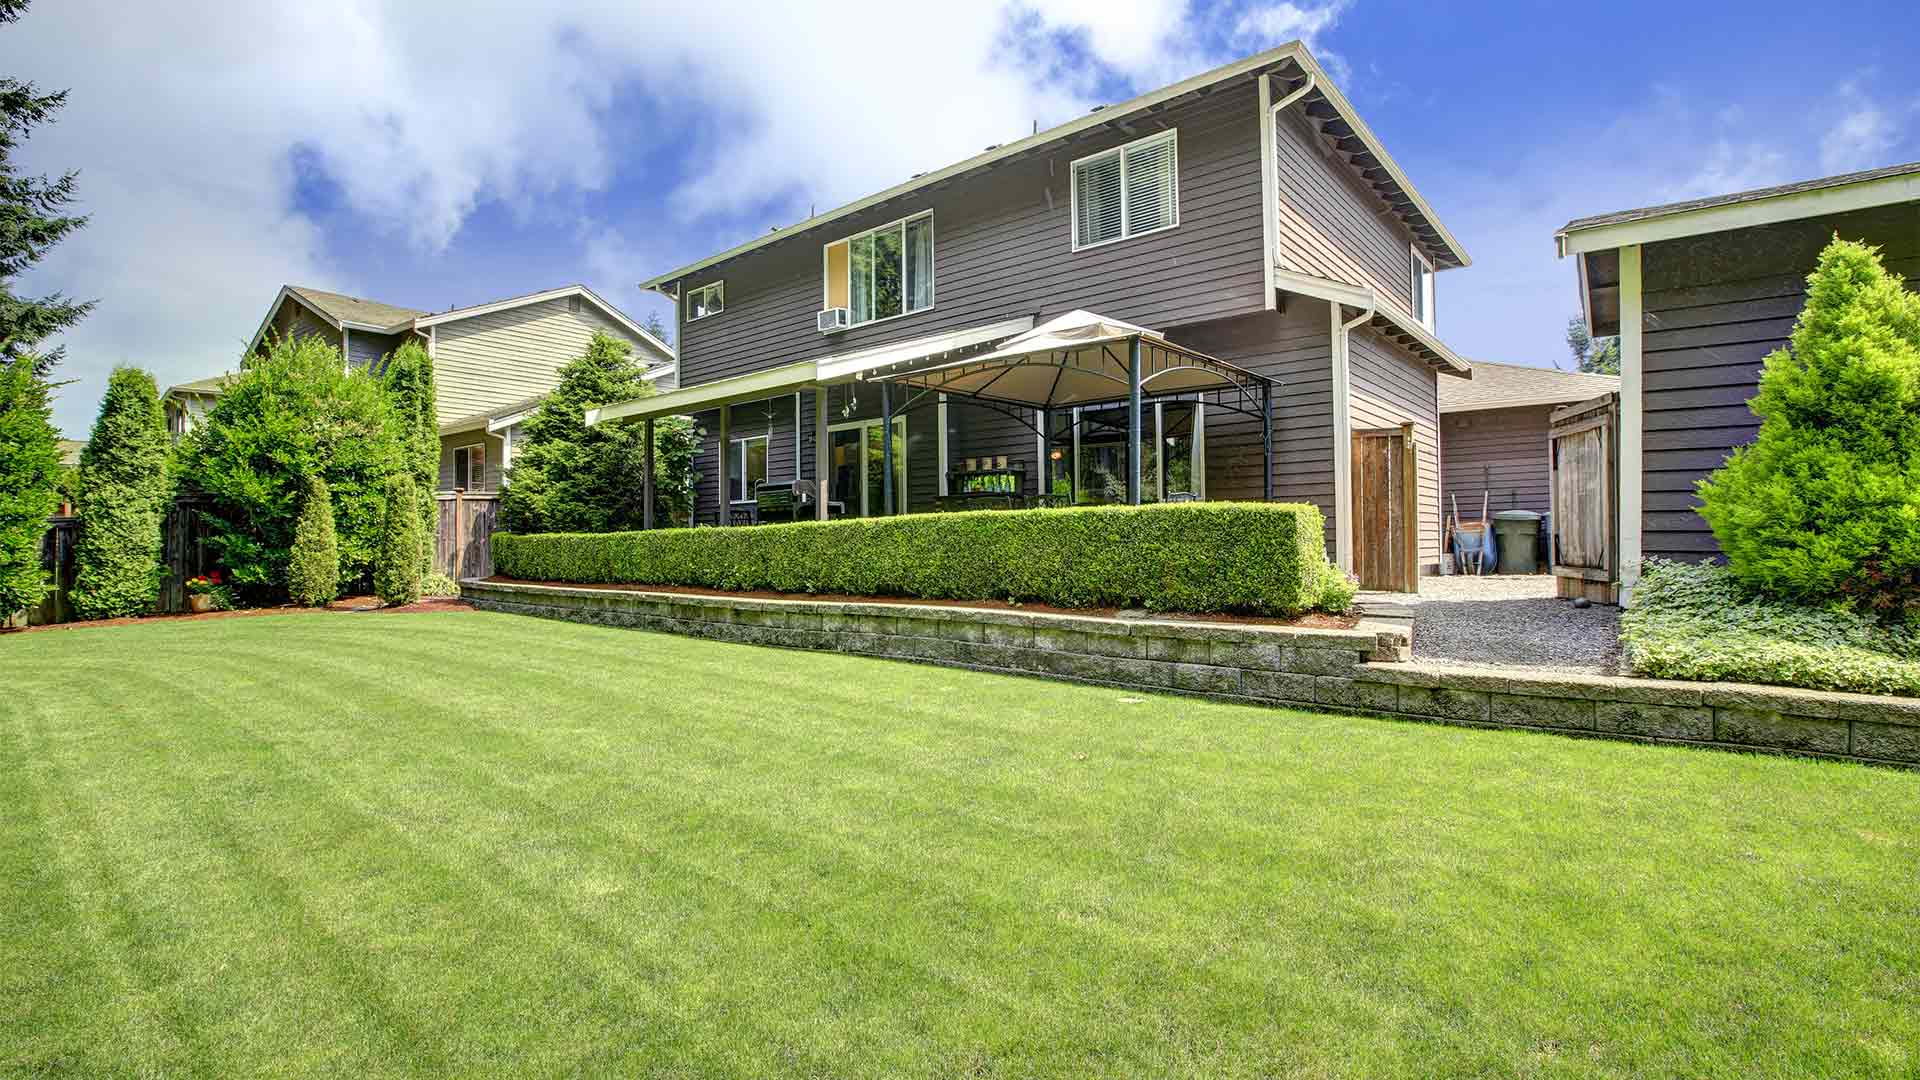 Residential property in Gresham, OR with a healthy, fertilized lawn.